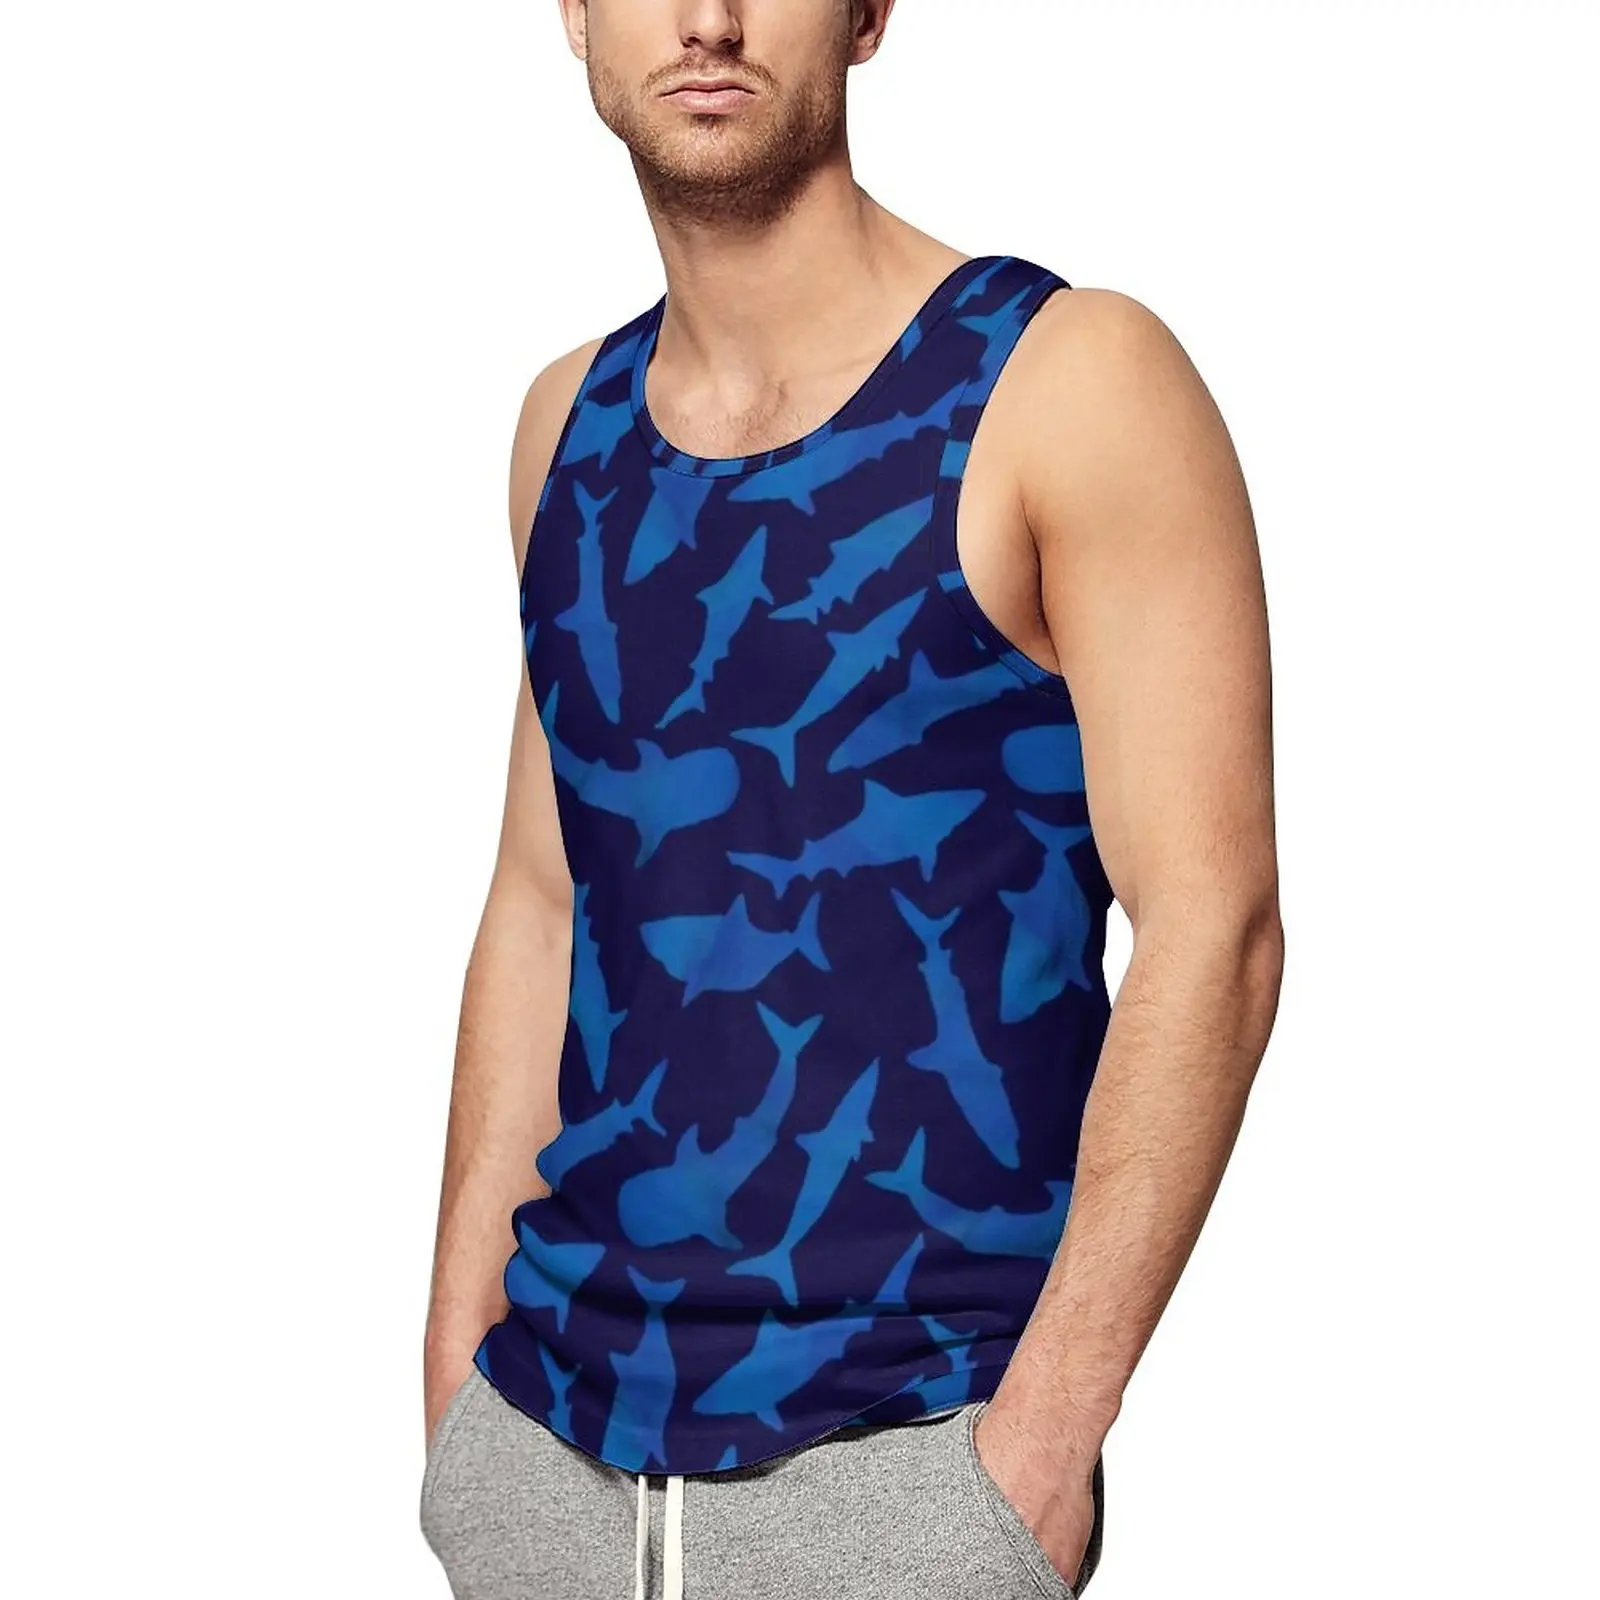 

Whale Shark Tank Top Cartoon Animal Print Vintage Tops Daily Bodybuilding Males Design Sleeveless Vests Large Size 4XL 5XL